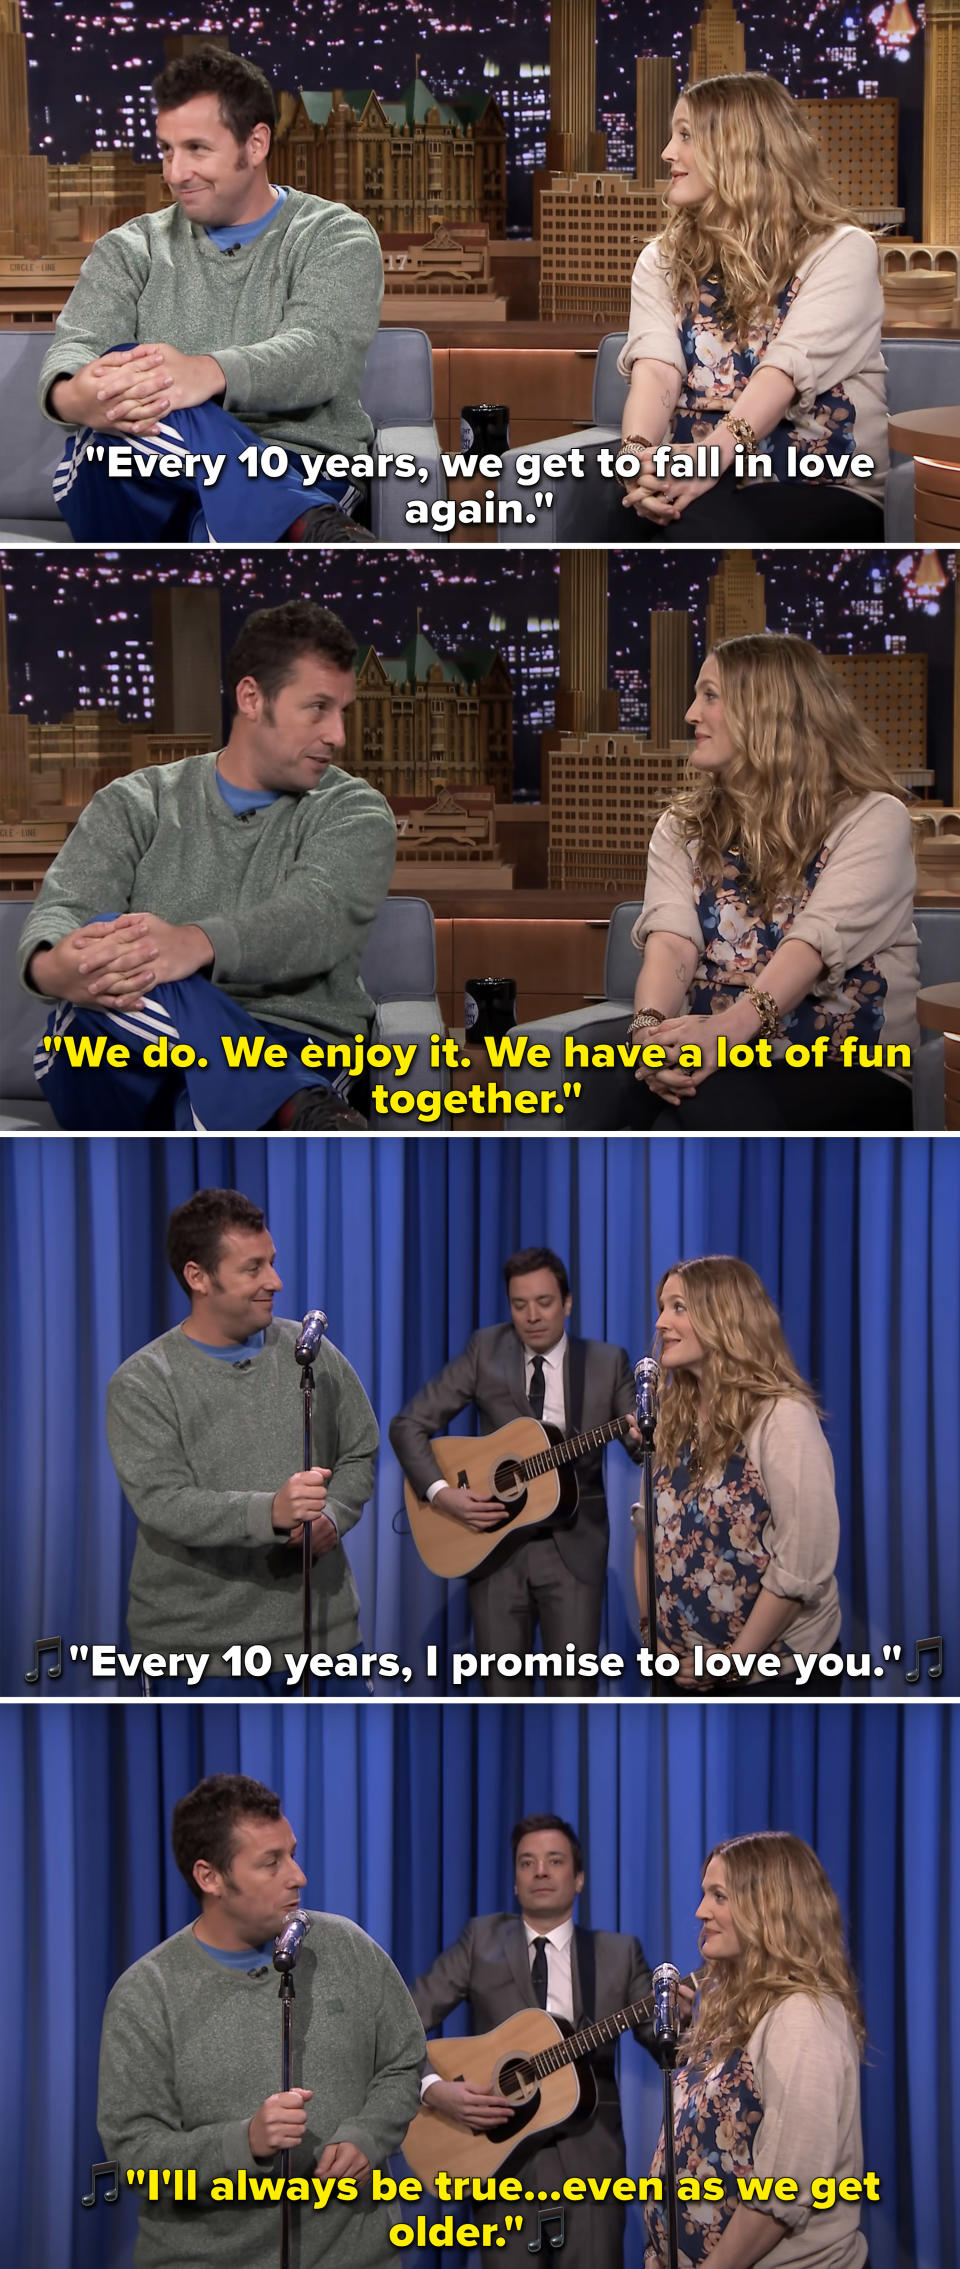 Adam Sandler and Drew Barrymore singing on "The Tonight Show with Jimmy Fallon" as Jimmy Fallon plays guitar